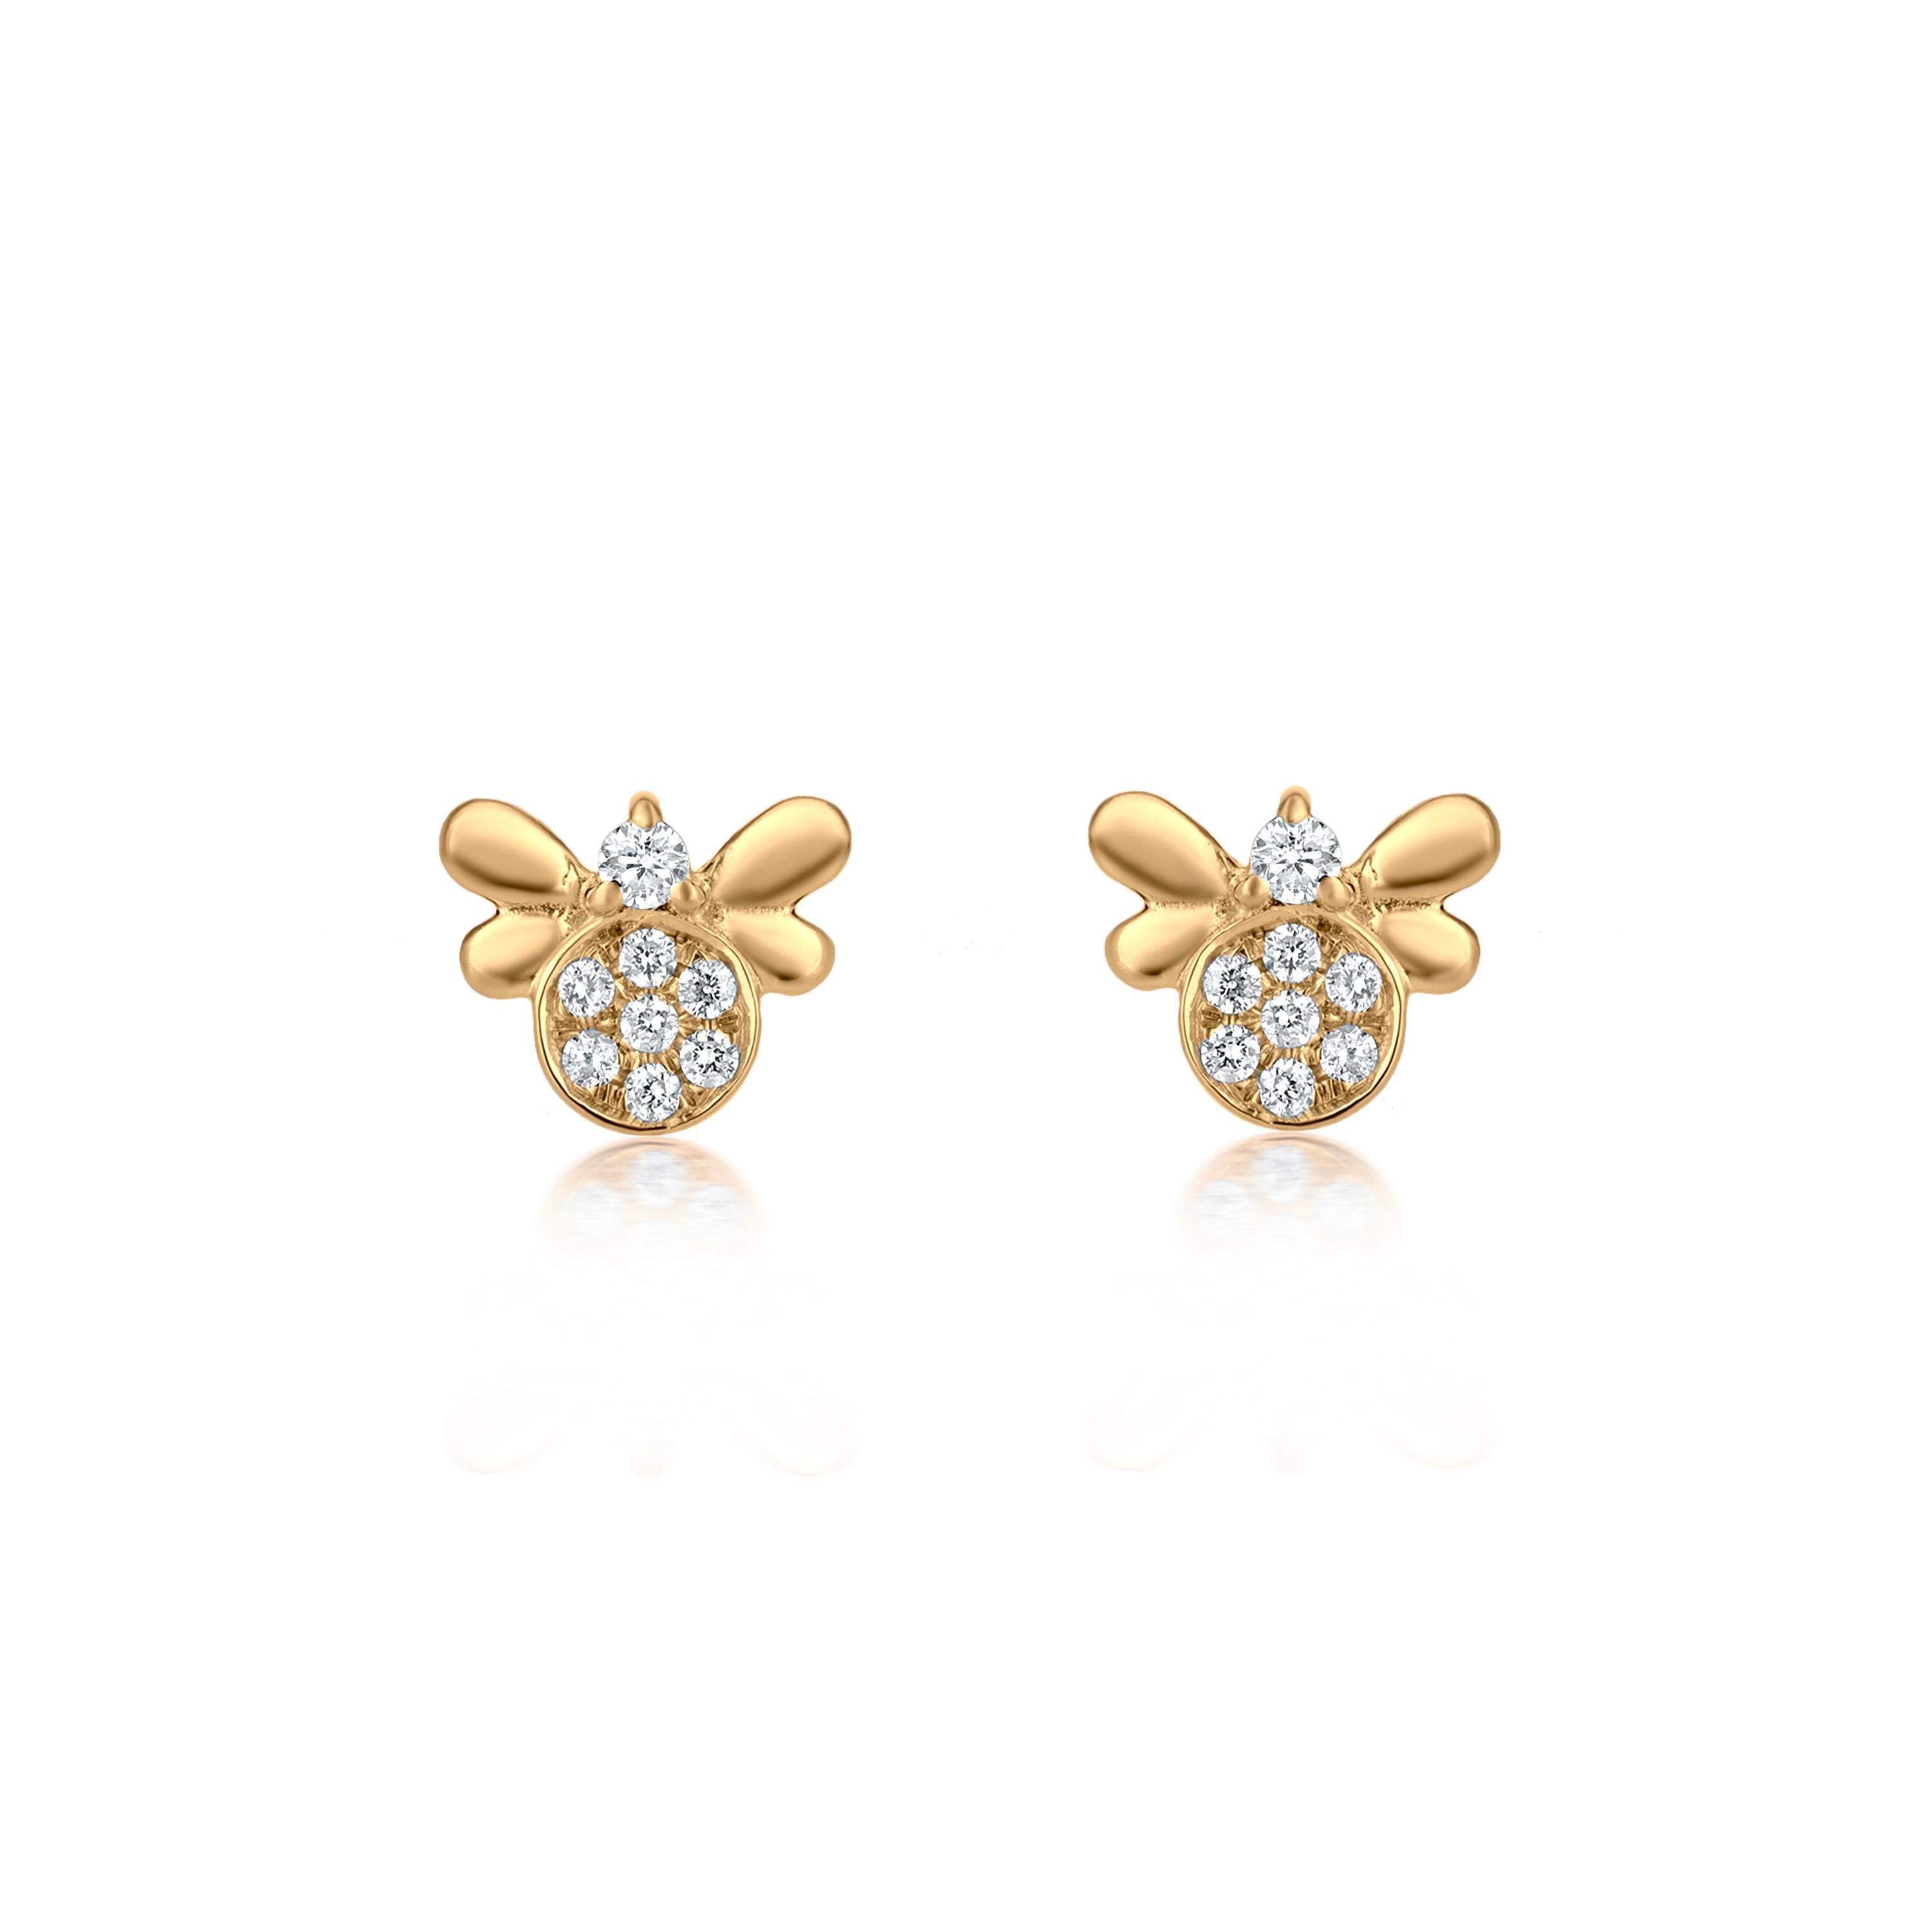 Grace your earlobes with a Luxle bee stud it symbolizes a strong network of unconditional love and support. Subtle yet pretty this bee stud earrings is the new fashion statement. These stud earrings sparkle with  16 round cut diamonds, totaling